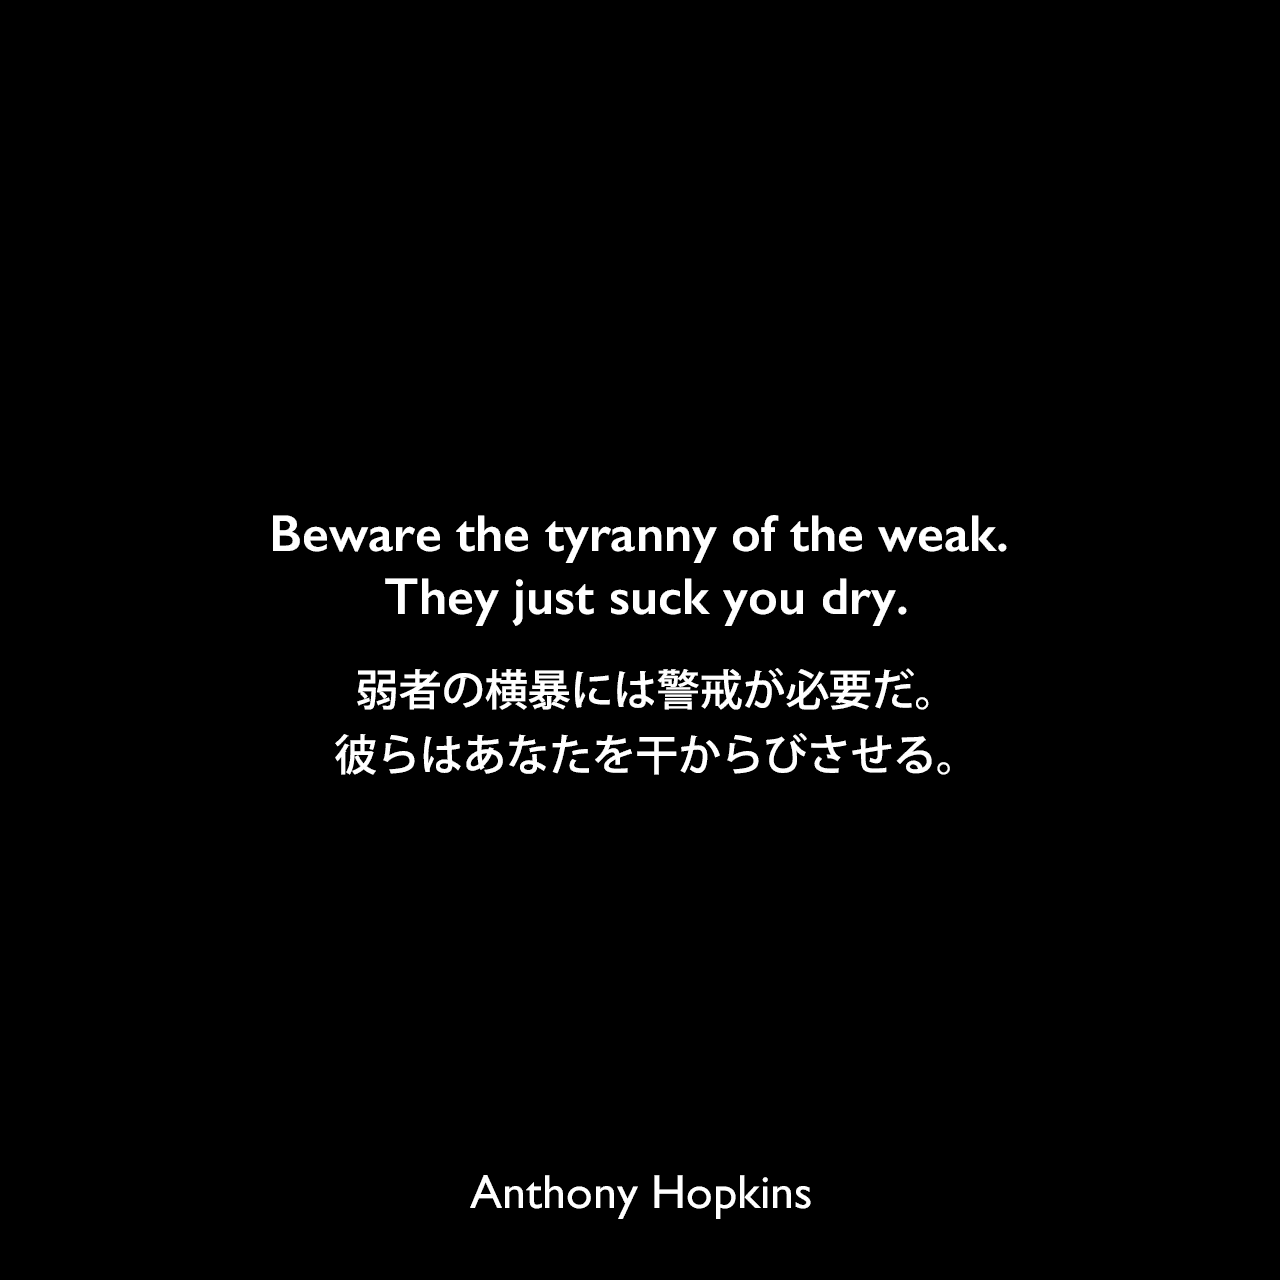 Beware the tyranny of the weak. They just suck you dry.弱者の横暴には警戒が必要だ。彼らはあなたを干からびさせる。Anthony Hopkins